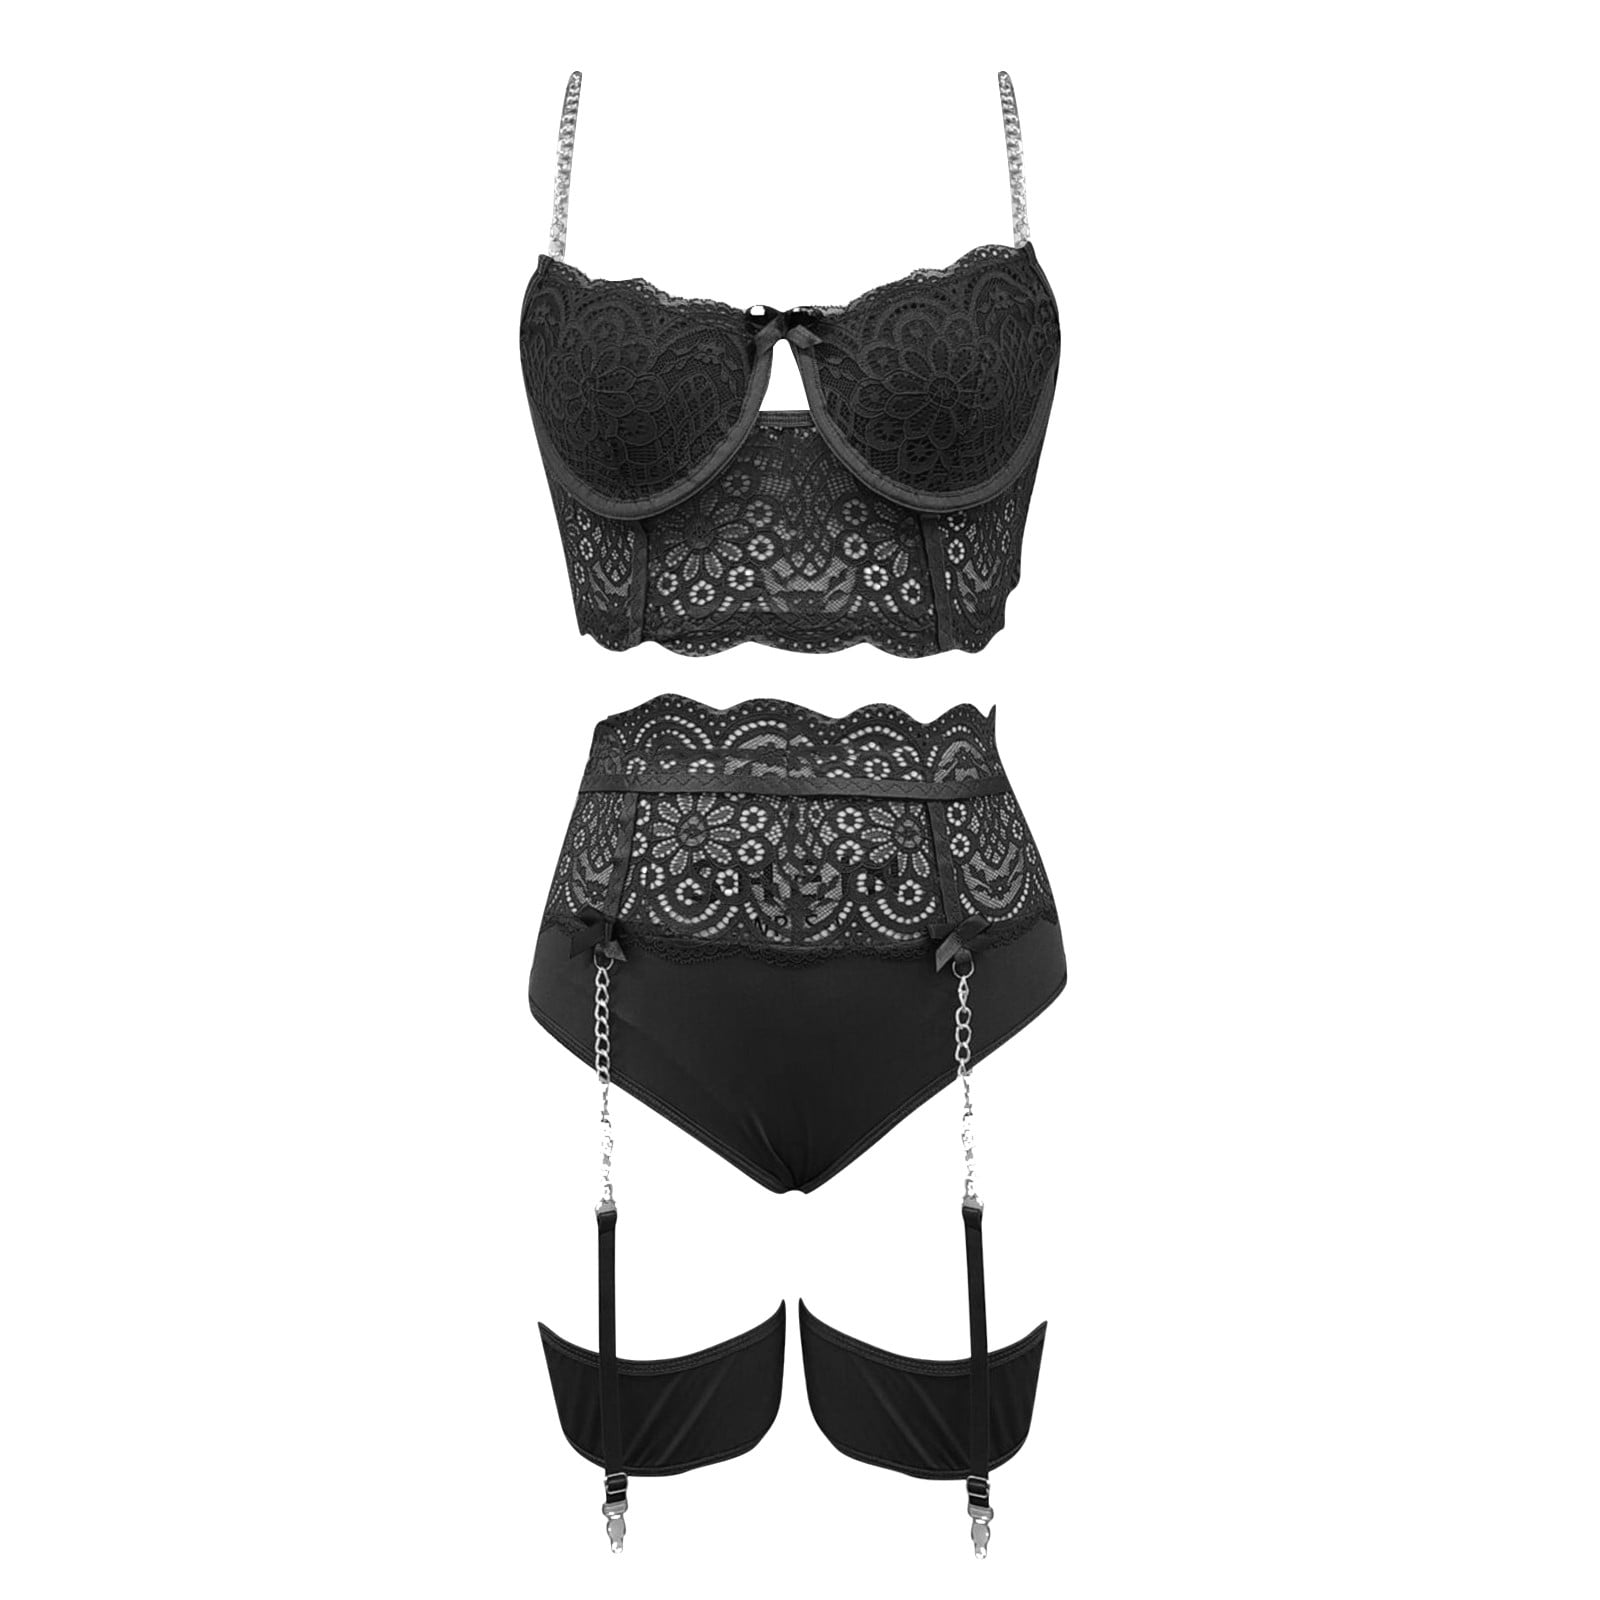  LEWGEL Lingerie for Women Cut Out Embroidery Mesh Crotchless  Lingerie Set Sleep & Lounge (Color : Black, Size : Medium) : Clothing,  Shoes & Jewelry